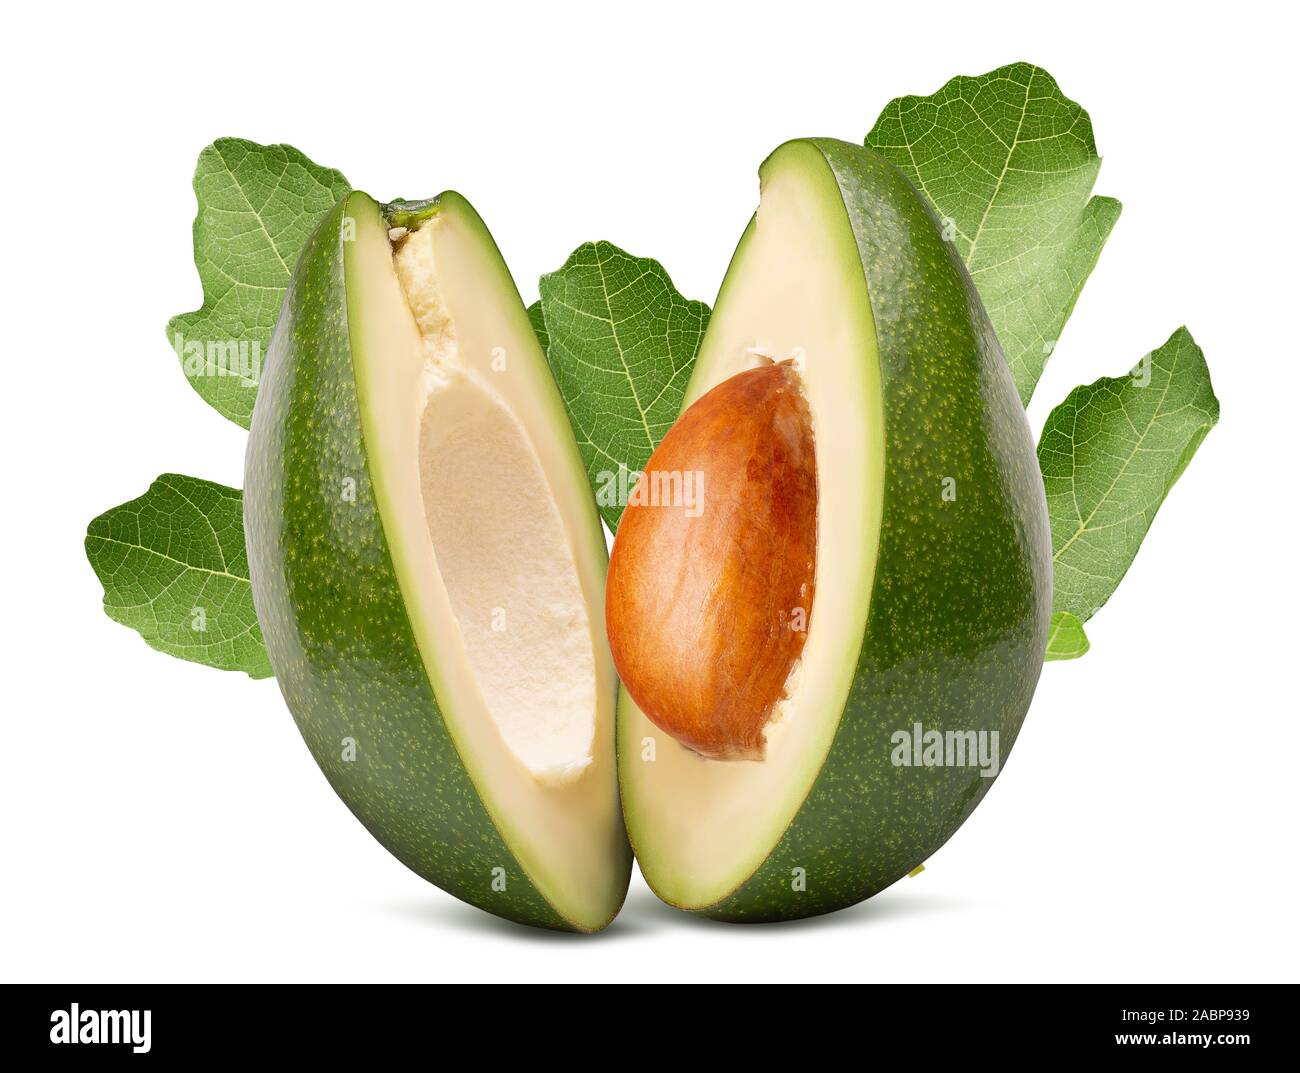 avocado with leaves isolated on a white background. Stock Photo